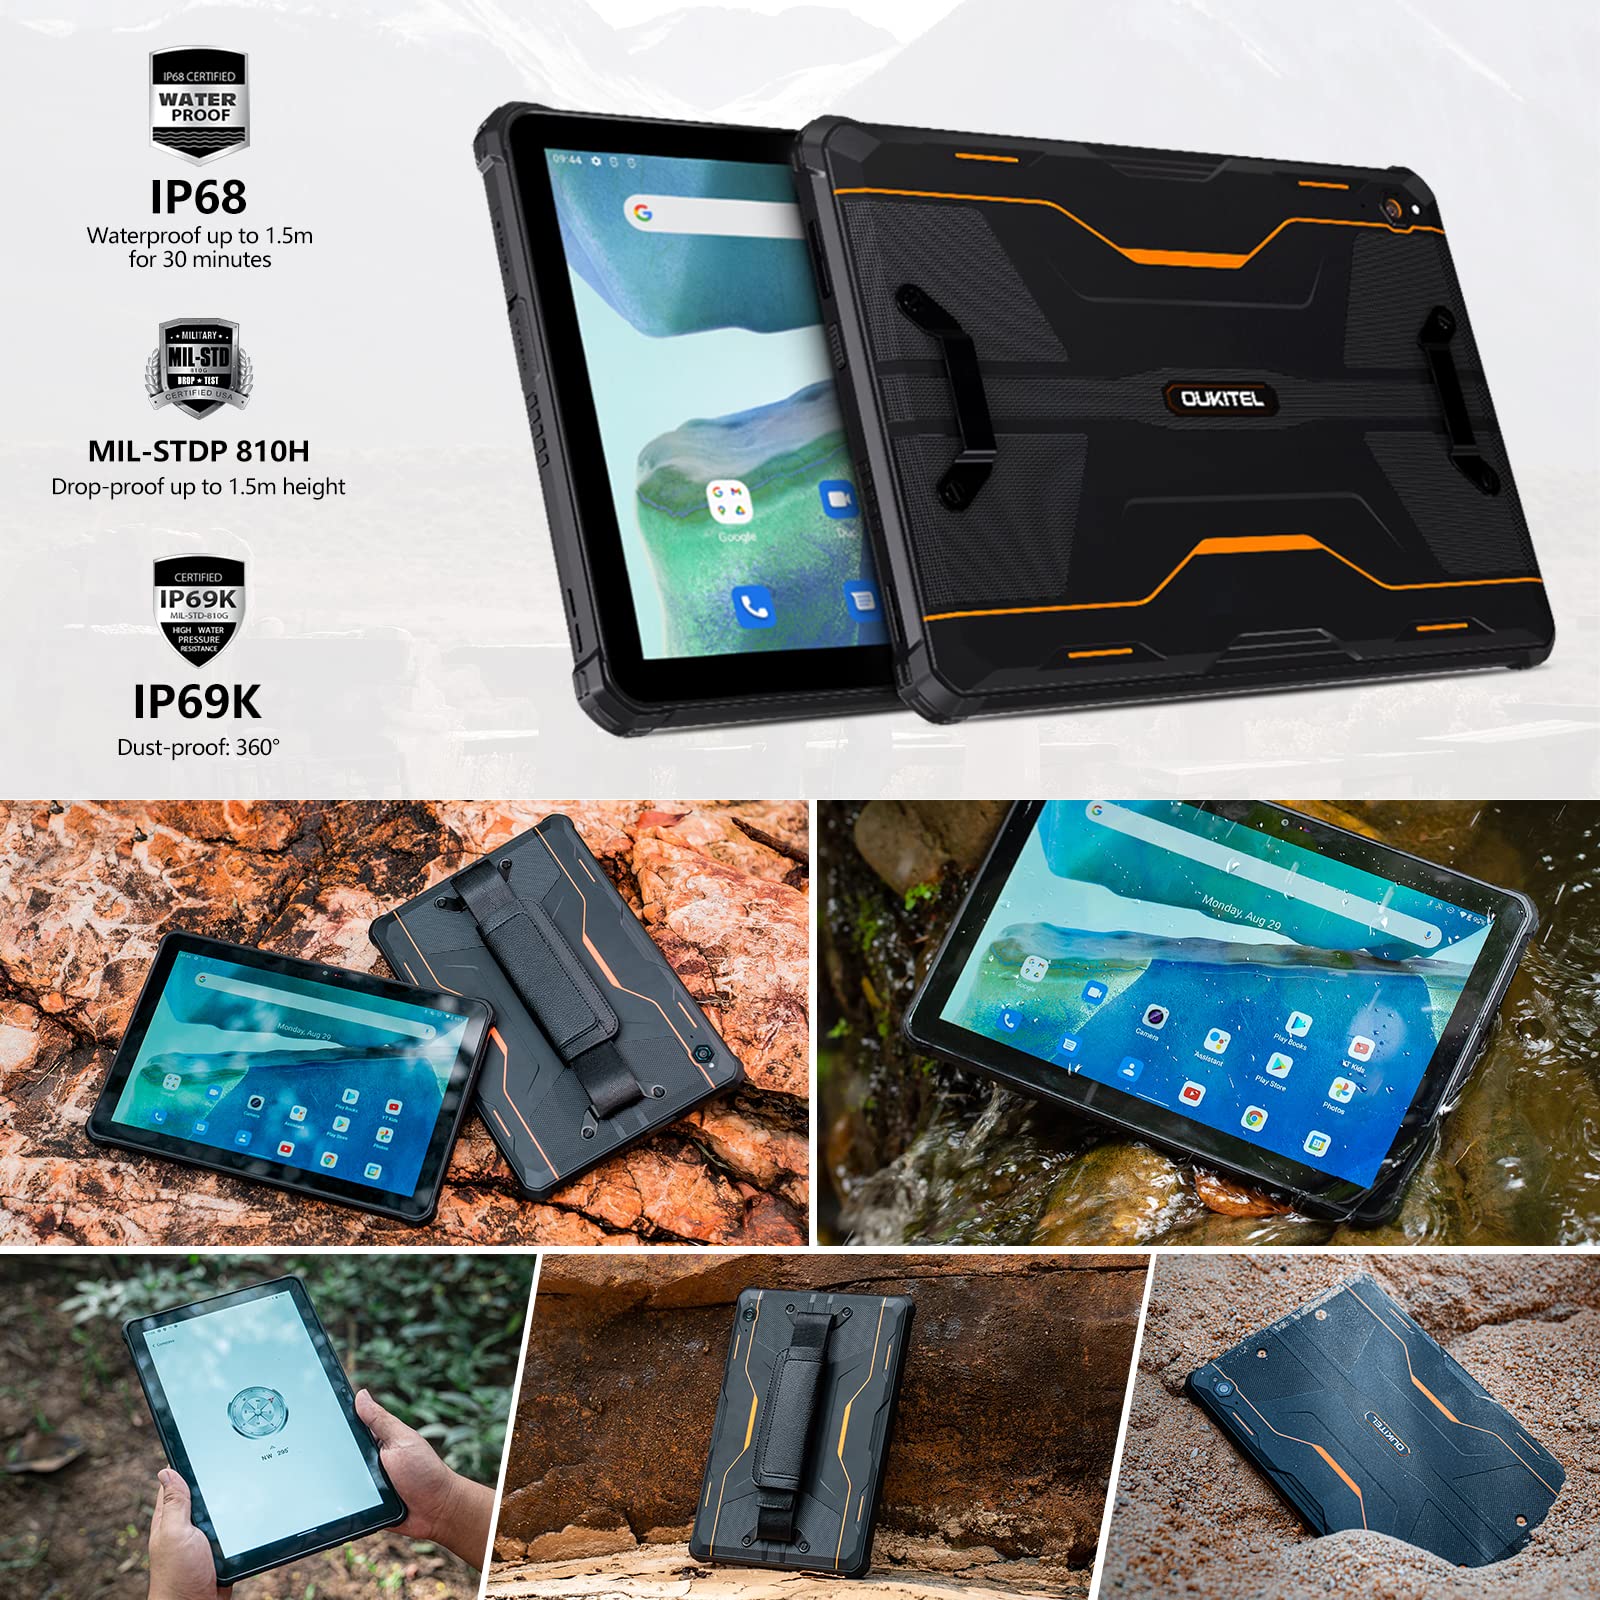 10 inch Android Tablet,OUKITEL RT2 20000mAh Rugged Tablet Android 12 8GB+128GB Tablet IP68,IP69K Waterproof Tablet 4G LTE Dual SIM+5G WiFi Smart Tbalet 16MP+16MP Camera OTG 33W Fast Charging